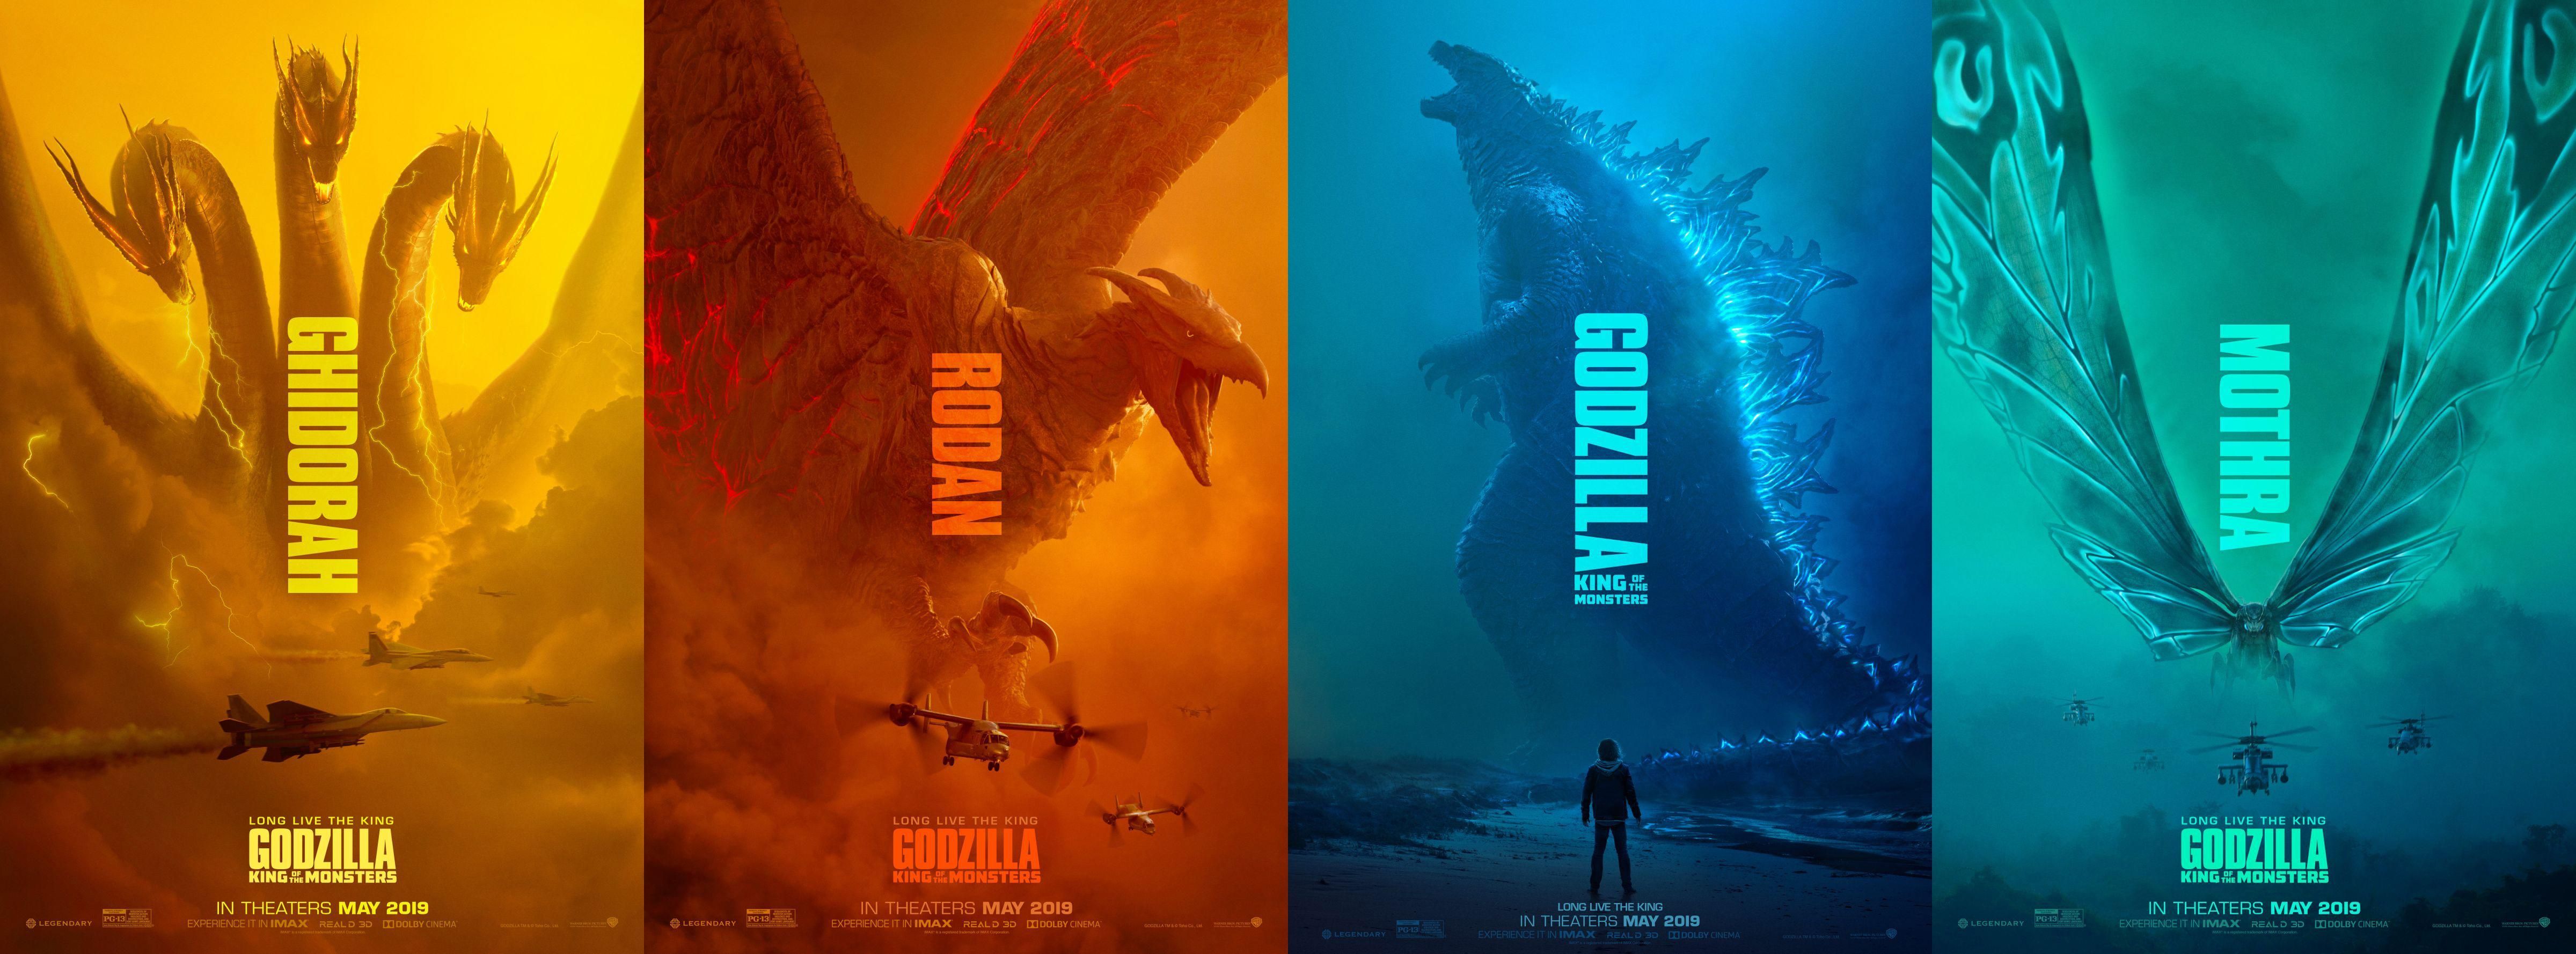 I made an Ultra Wide wallpaper from the Godzilla posters